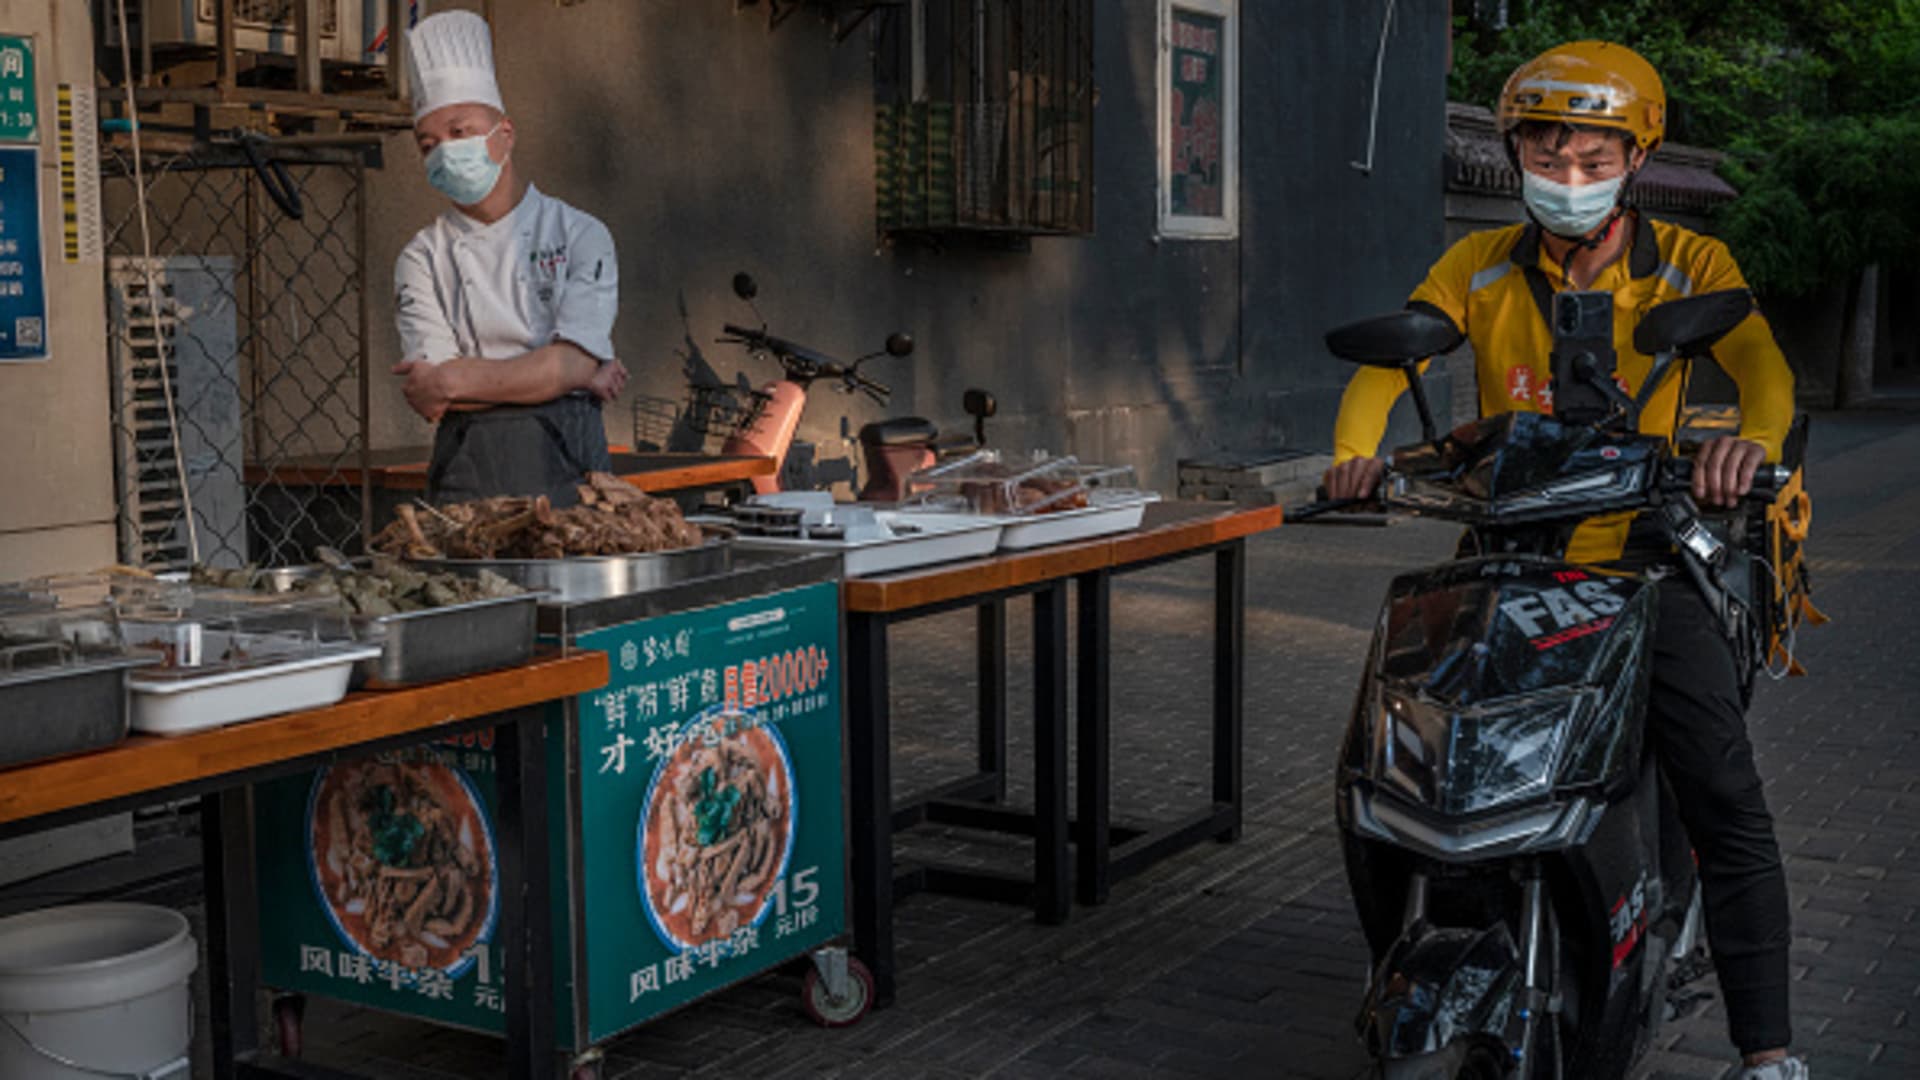 Beijing city bans in-restaurant dining as China’s Covid controls tighten